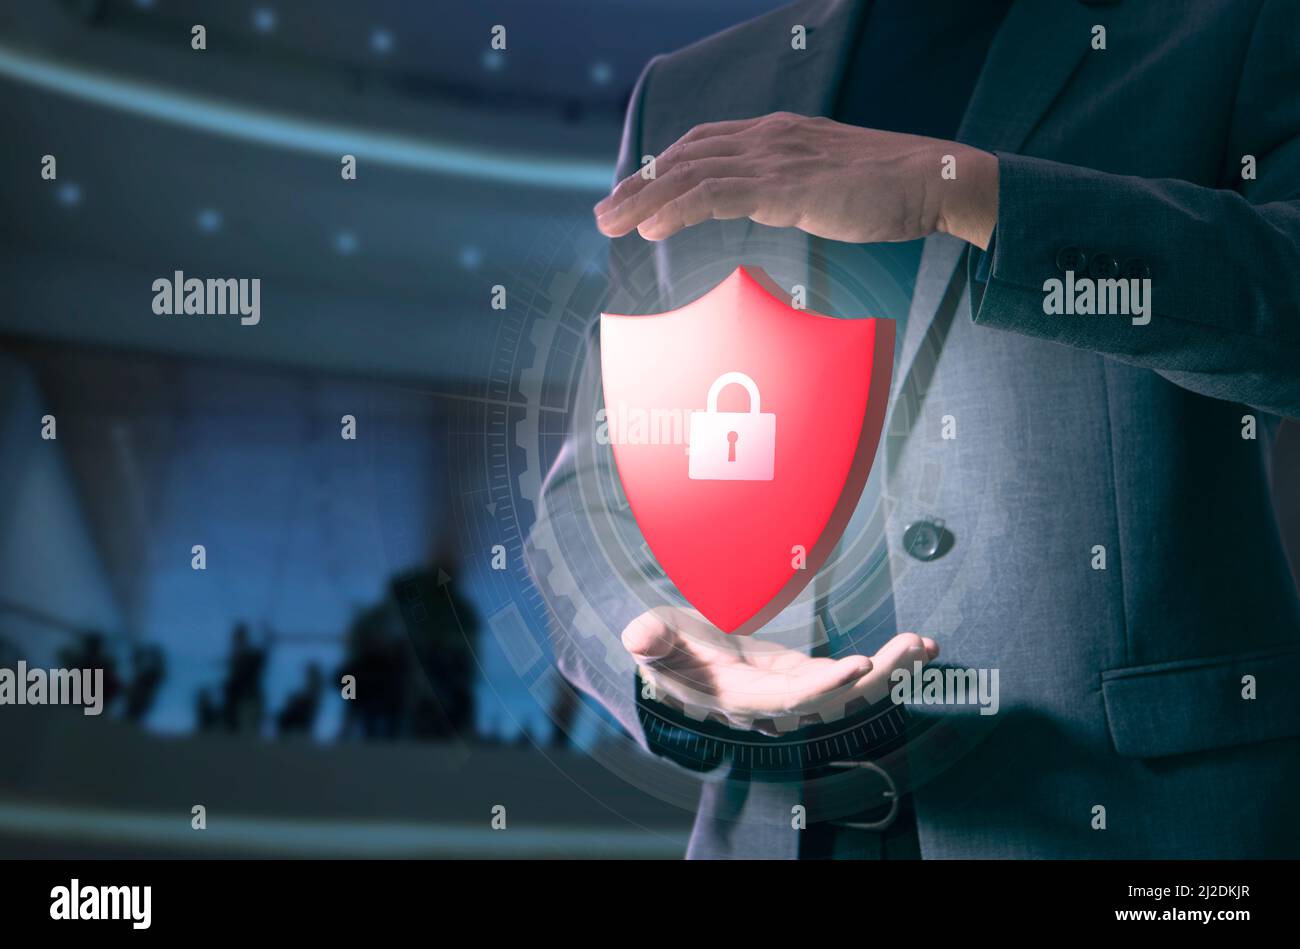 System administrator in gesture of expanding his hands holding a virtual red metal shield with padlock in system security and data protection concept Stock Photo